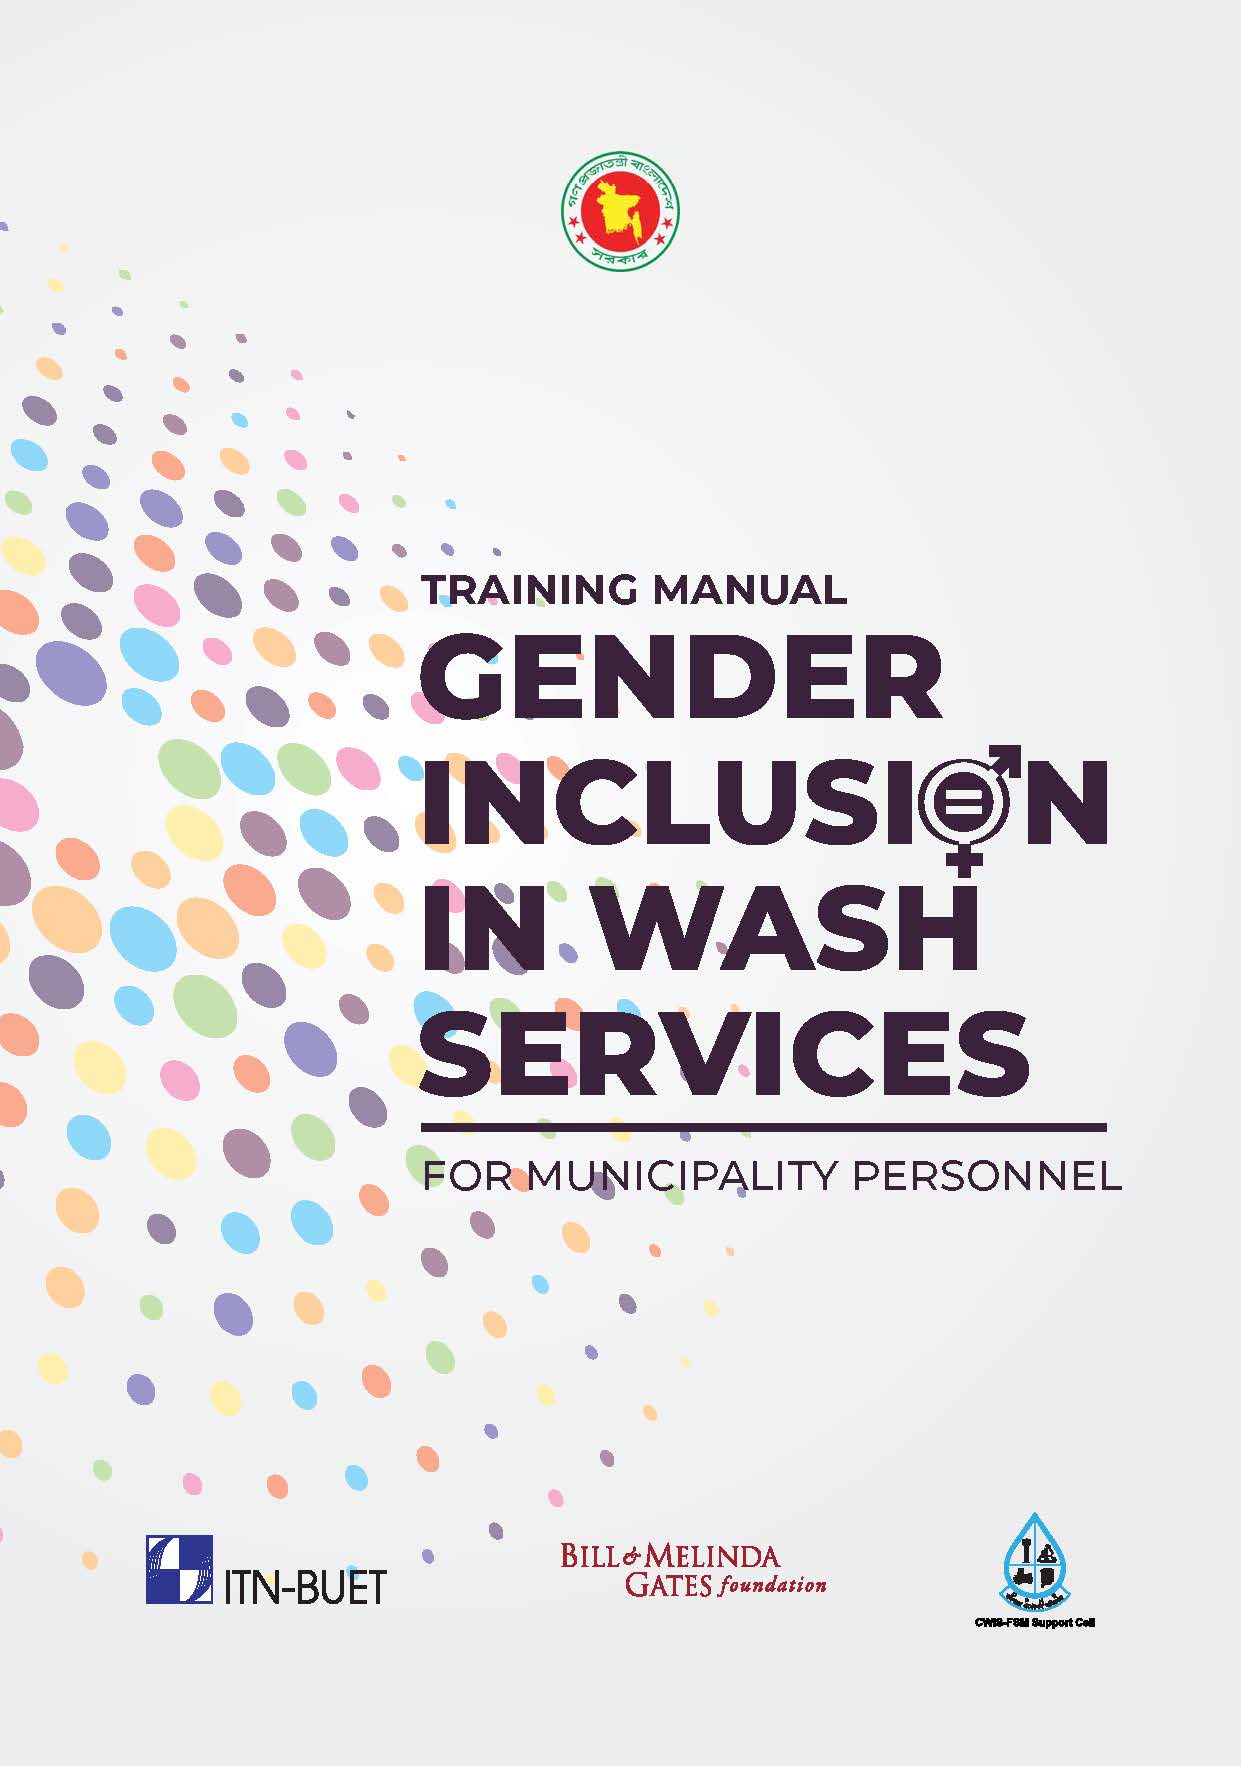 Training manual on Gender Inclusion in Wash Services for Municipality Personnel